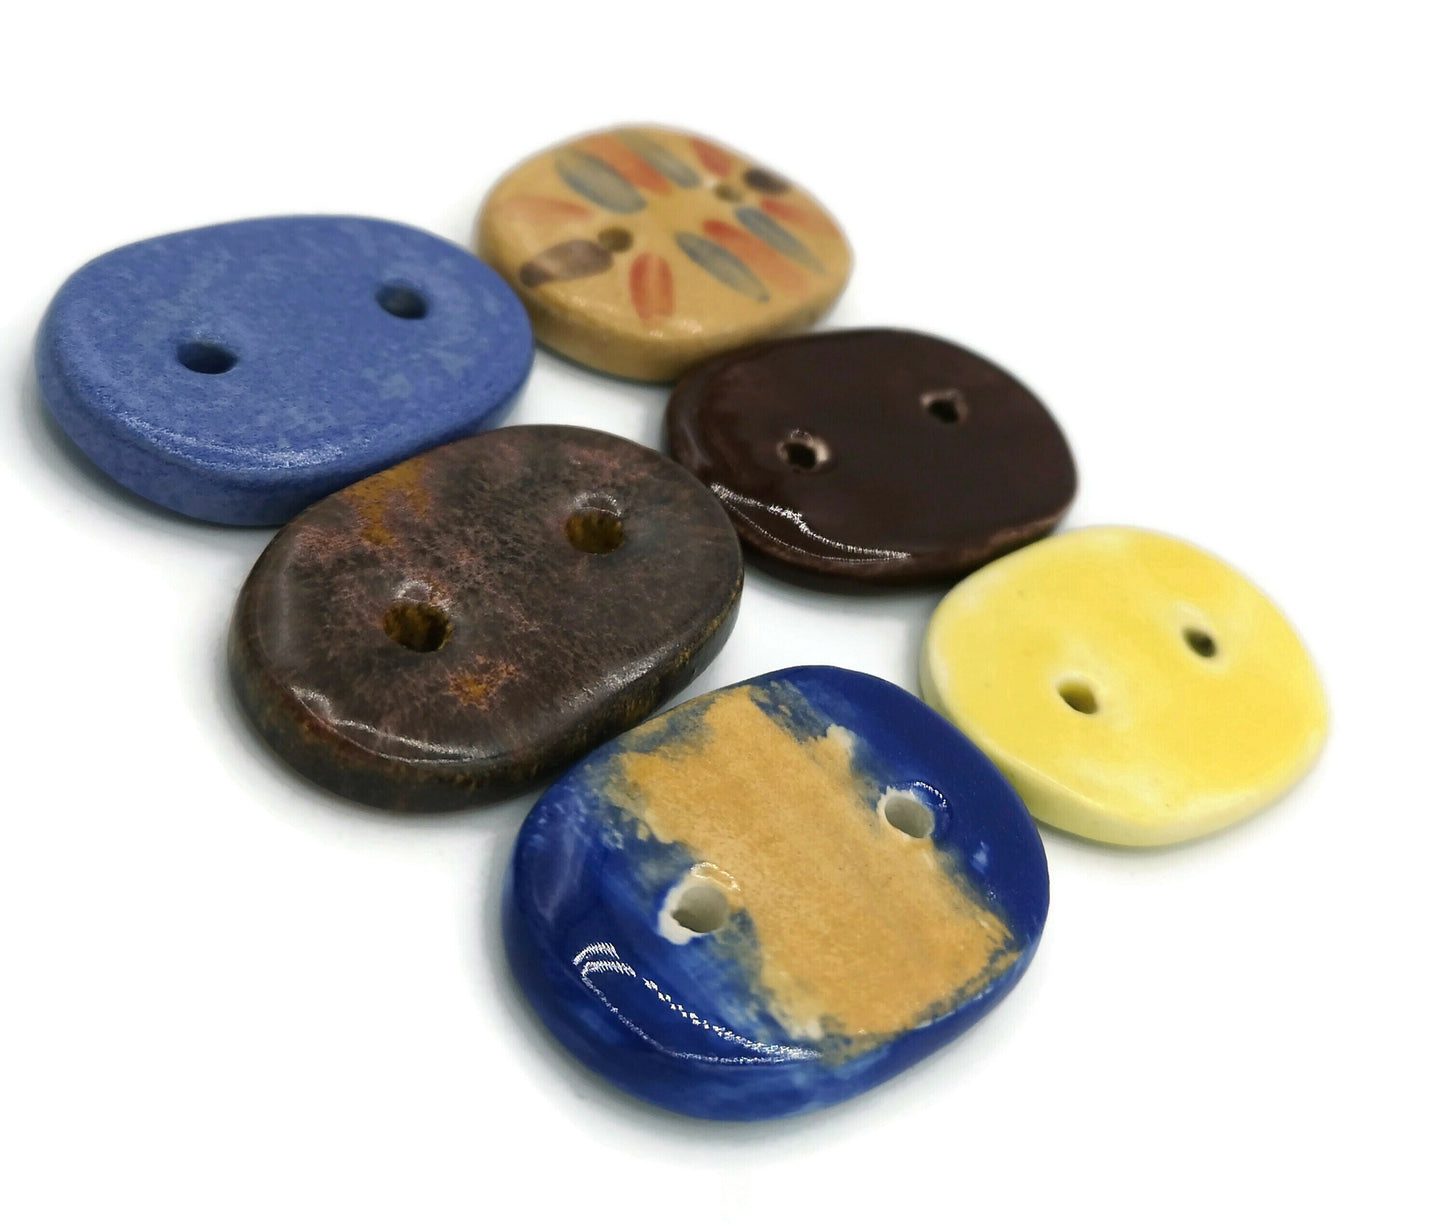 6Pc 35mm Extra Large Handmade Ceramic Sewing Buttons, Colorful Novelty Buttons, Hand Painted Oval Artisan Sewing Supplies And Notions - Ceramica Ana Rafael